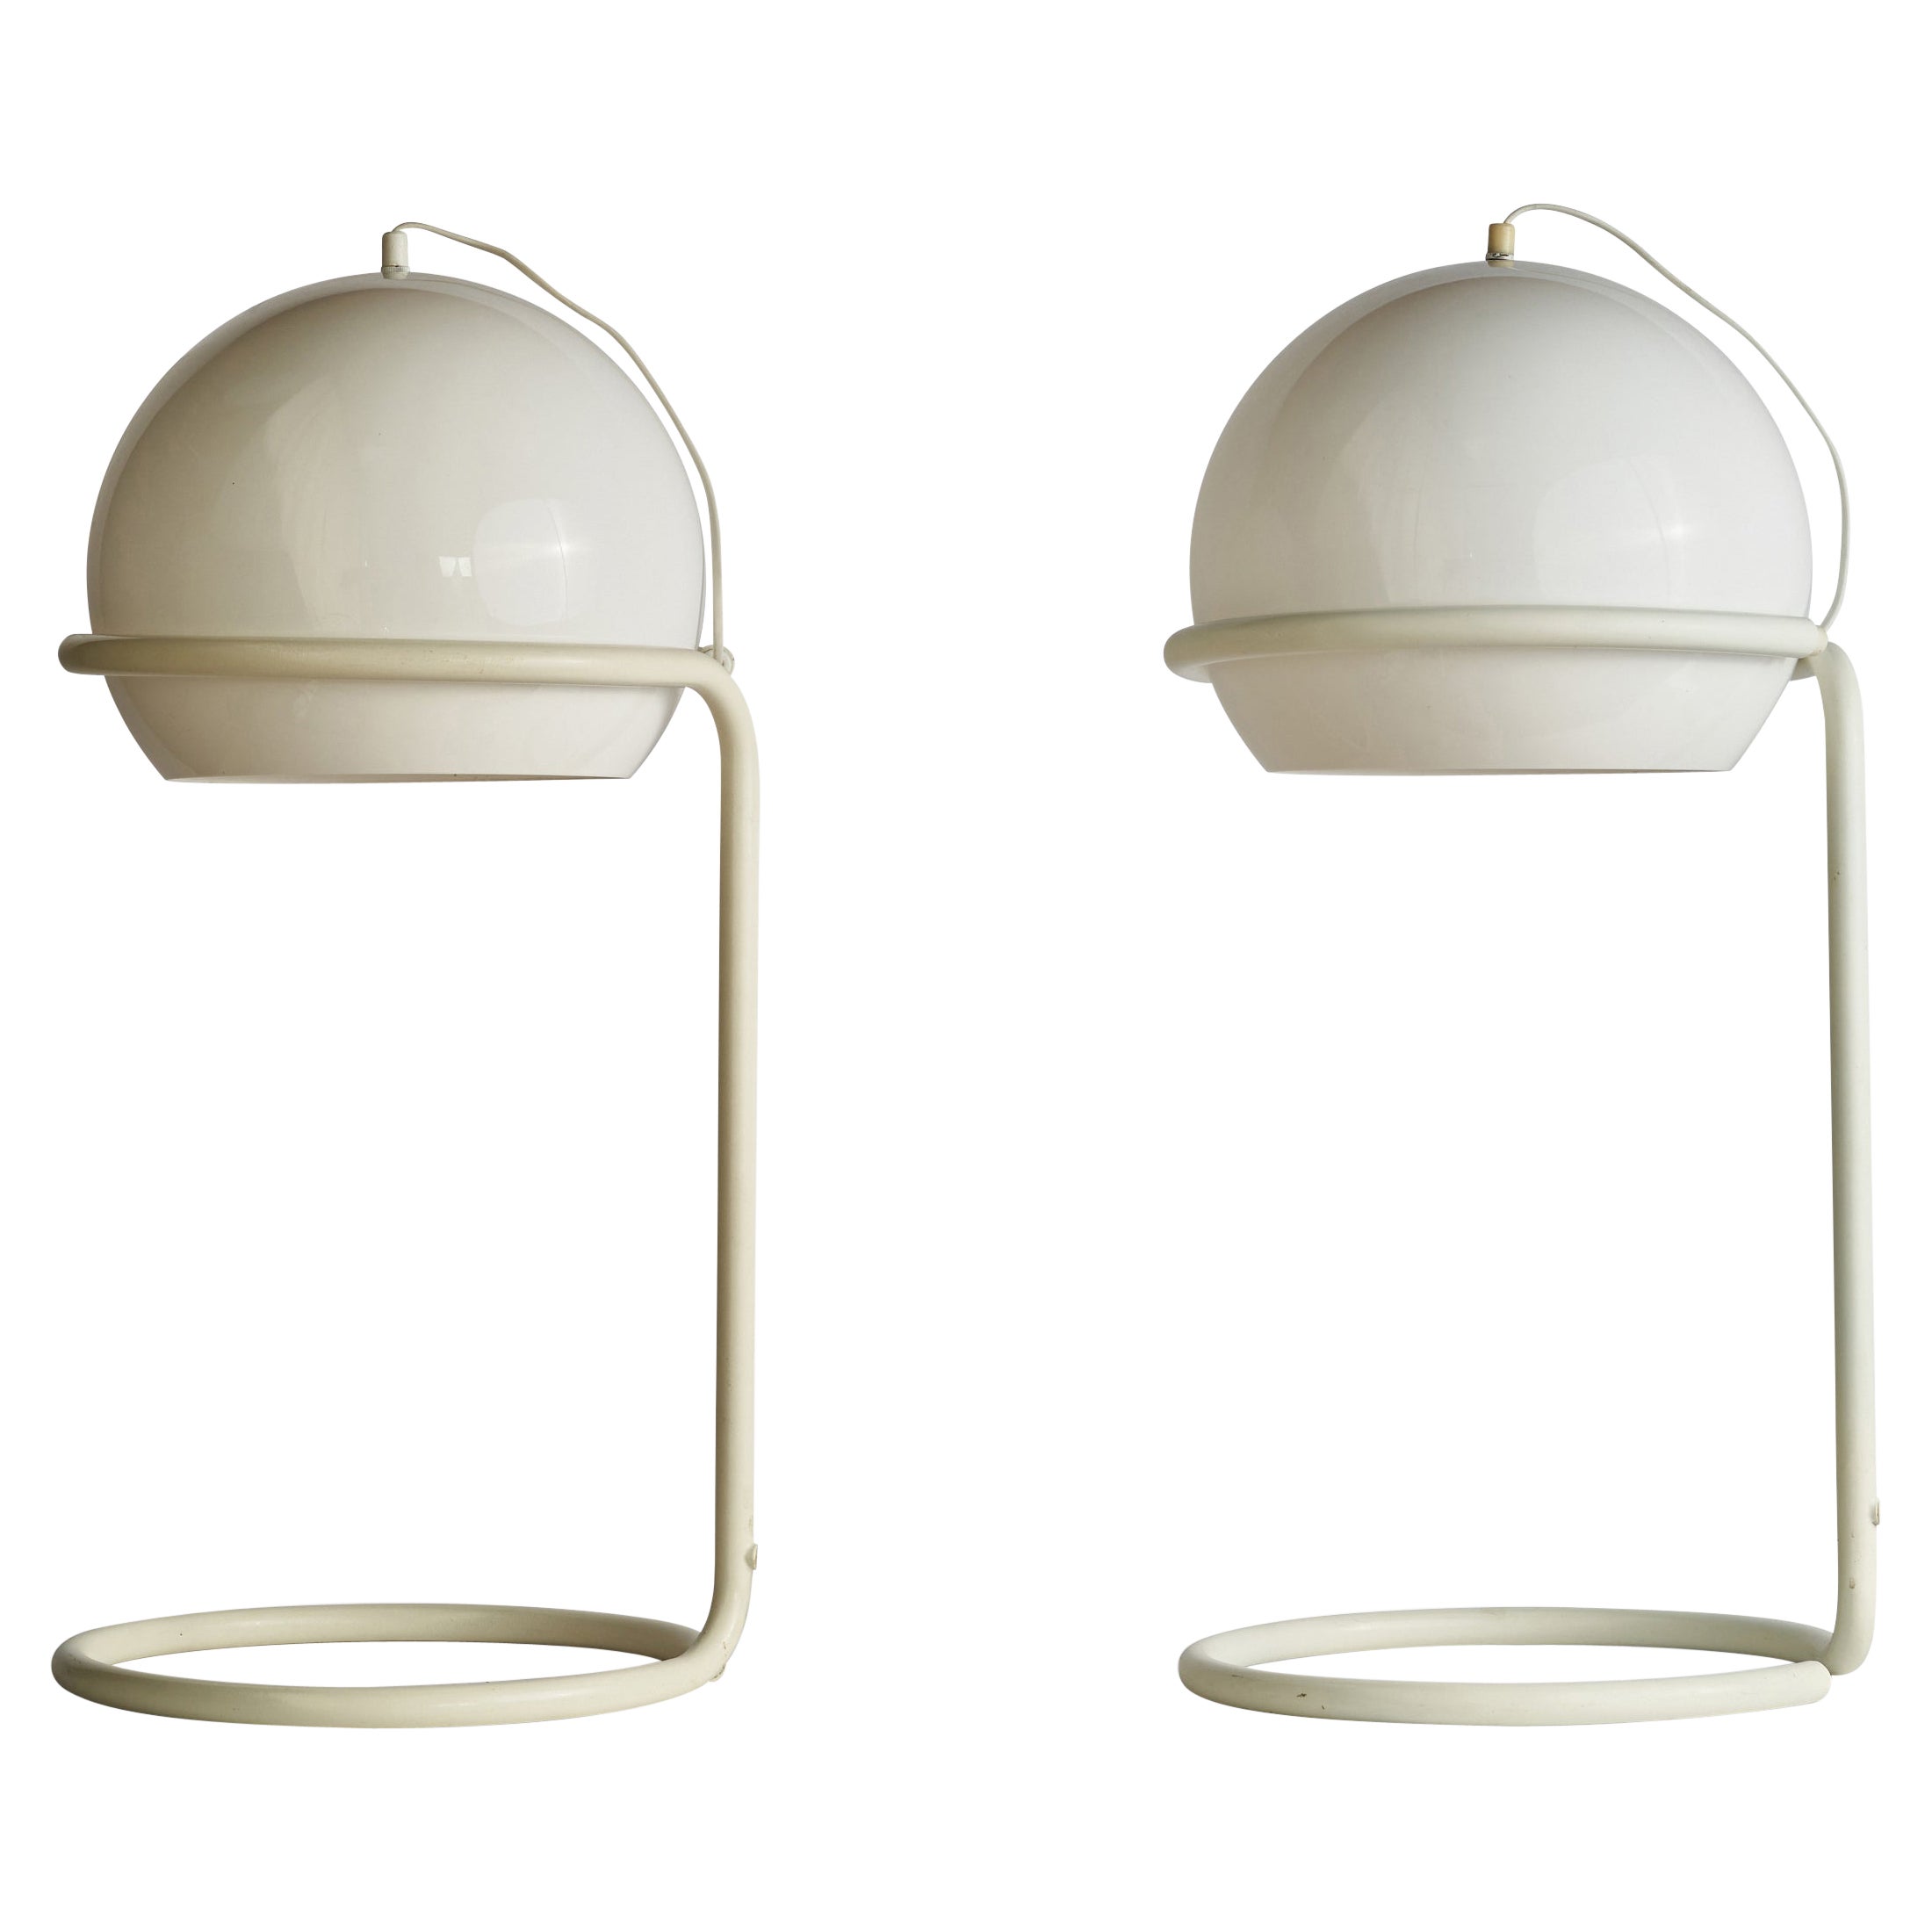 Ruud Ekstrand, Large Table Lamps, Metal, Acrylic, Sweden, 1970s For Sale